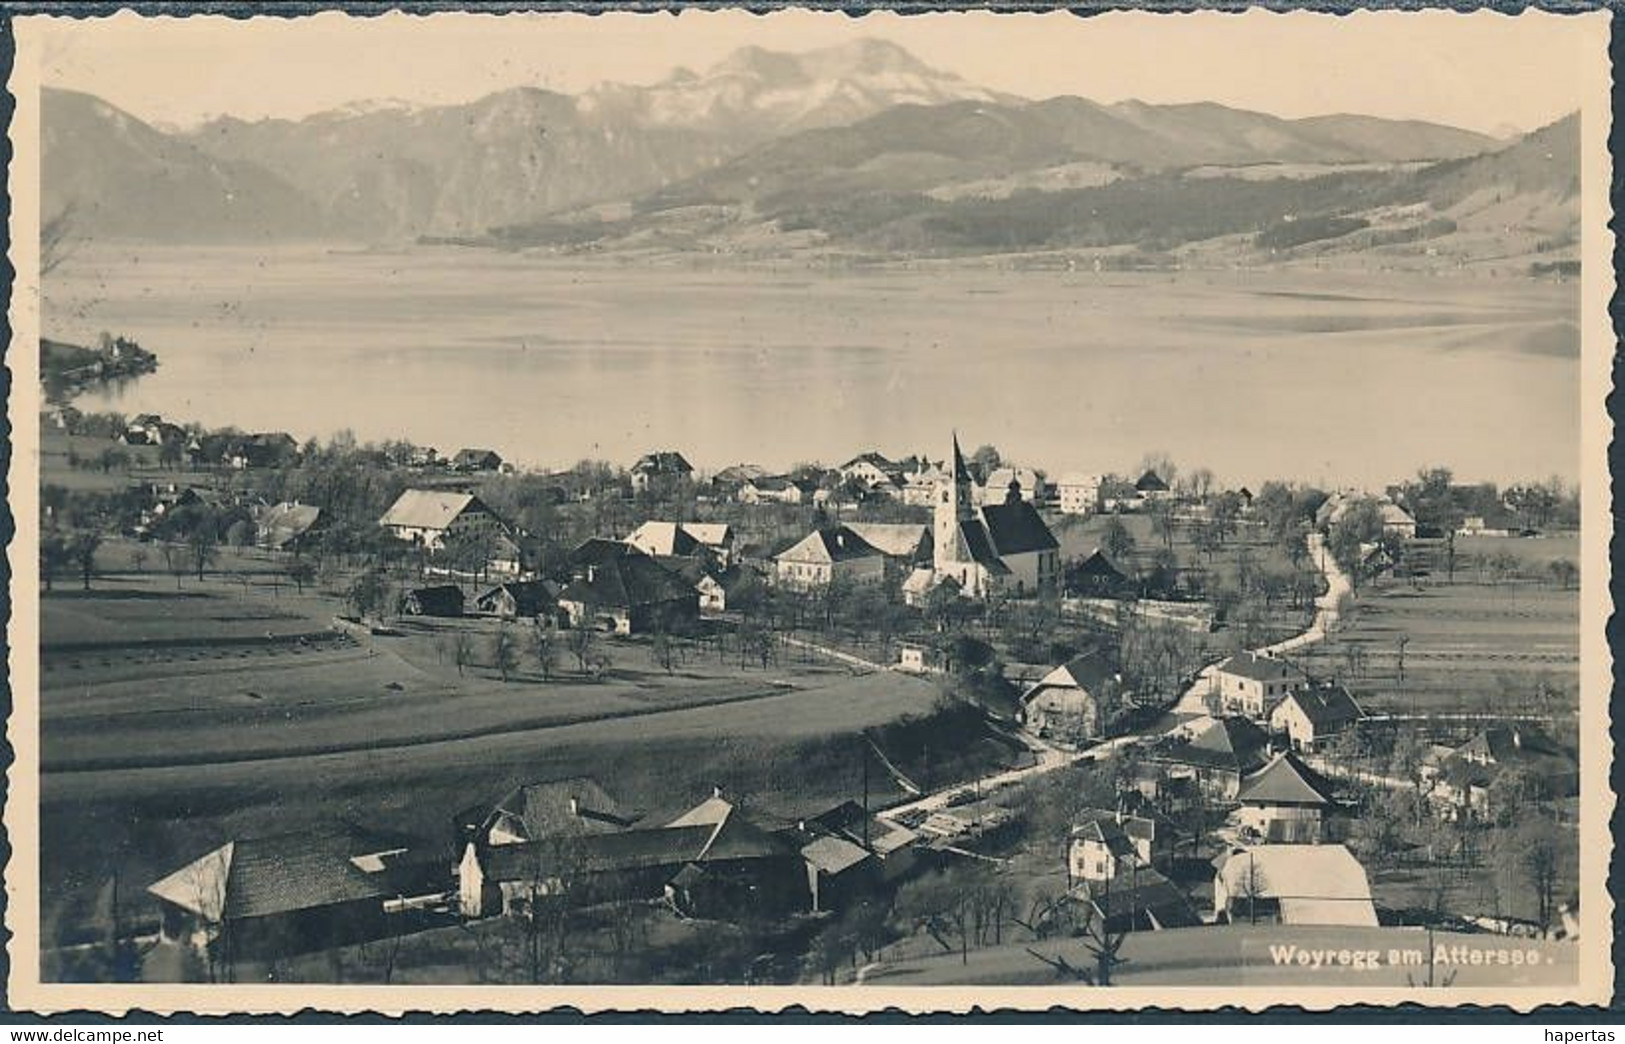 Weyregg Am Attersee - Posted 1935, Real Photo Postcard - Vöcklabruck